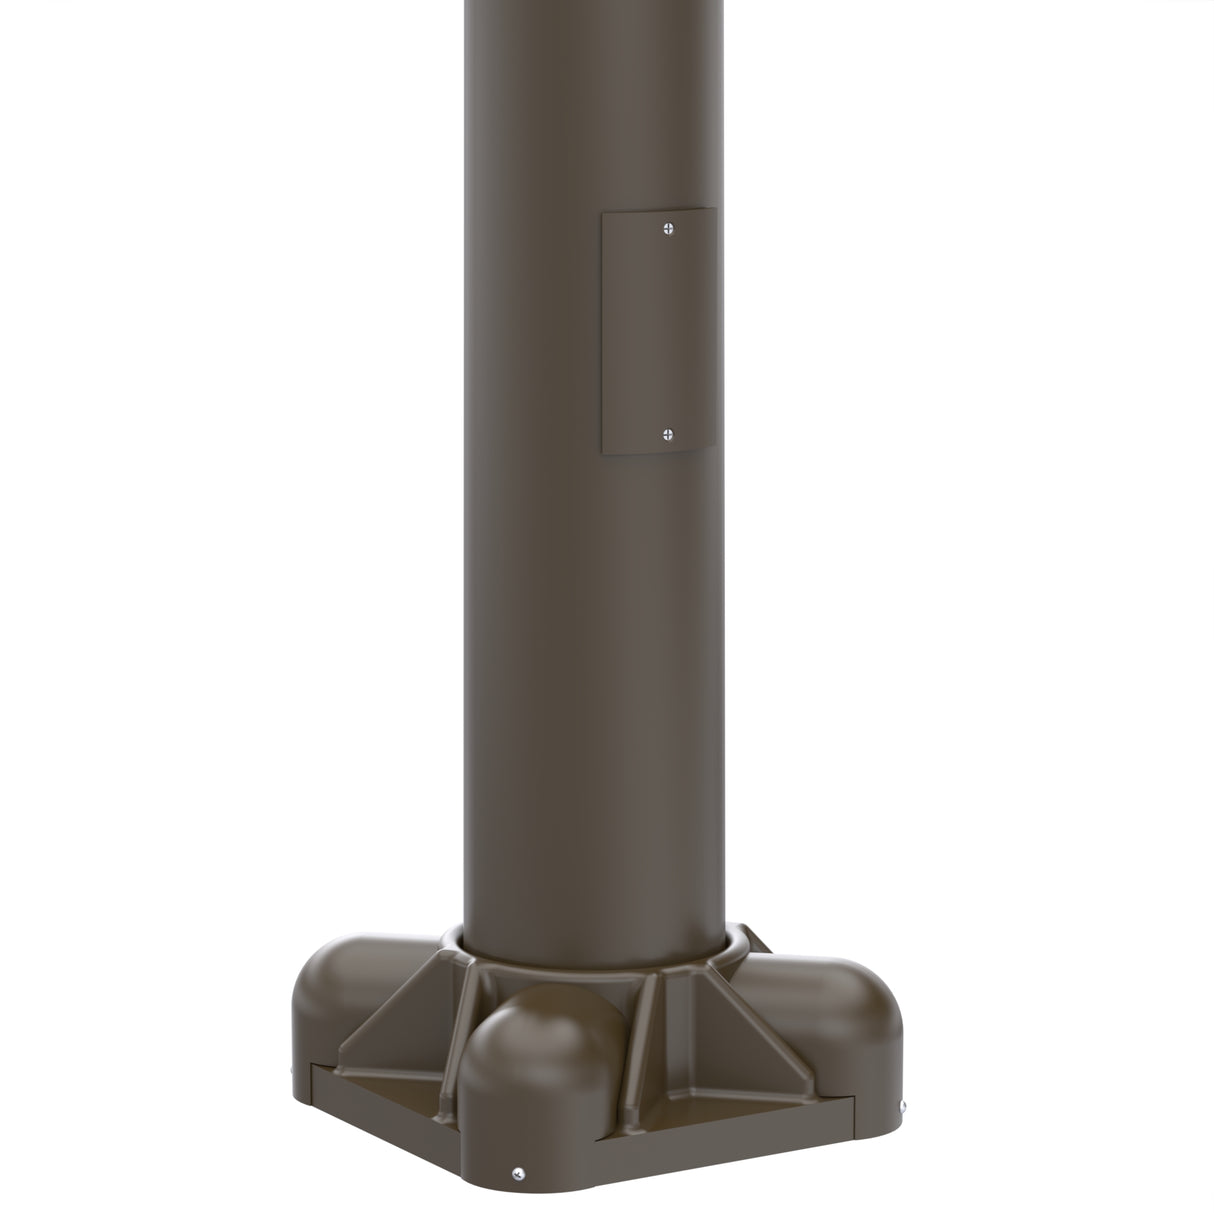 12' Tall x 5.0" Base OD x 3.0" Top OD x 0.125" Thick, Round Tapered Aluminum, Anchor Base Light Pole